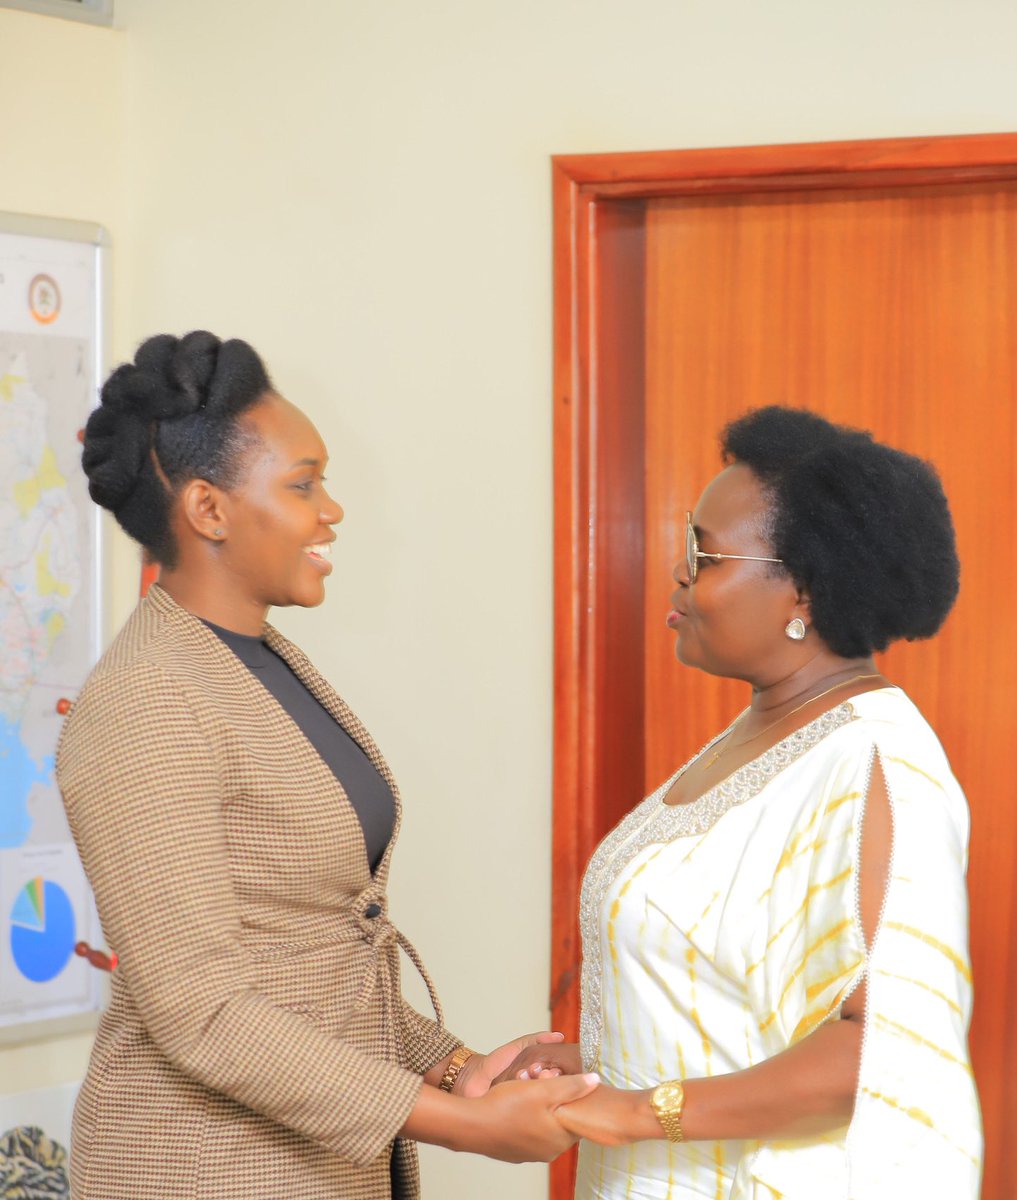 During the handover ceremony, Hon Ruth Nankabirwa has expressed heartfelt gratitude to the outgoing Minister Hon Dr Peter Teko Lokeris, for his extraordinary service to the Ministry and Uganda while extending a warm welcome to the incoming Minister of State, Hon Phiona Nyamutoro.